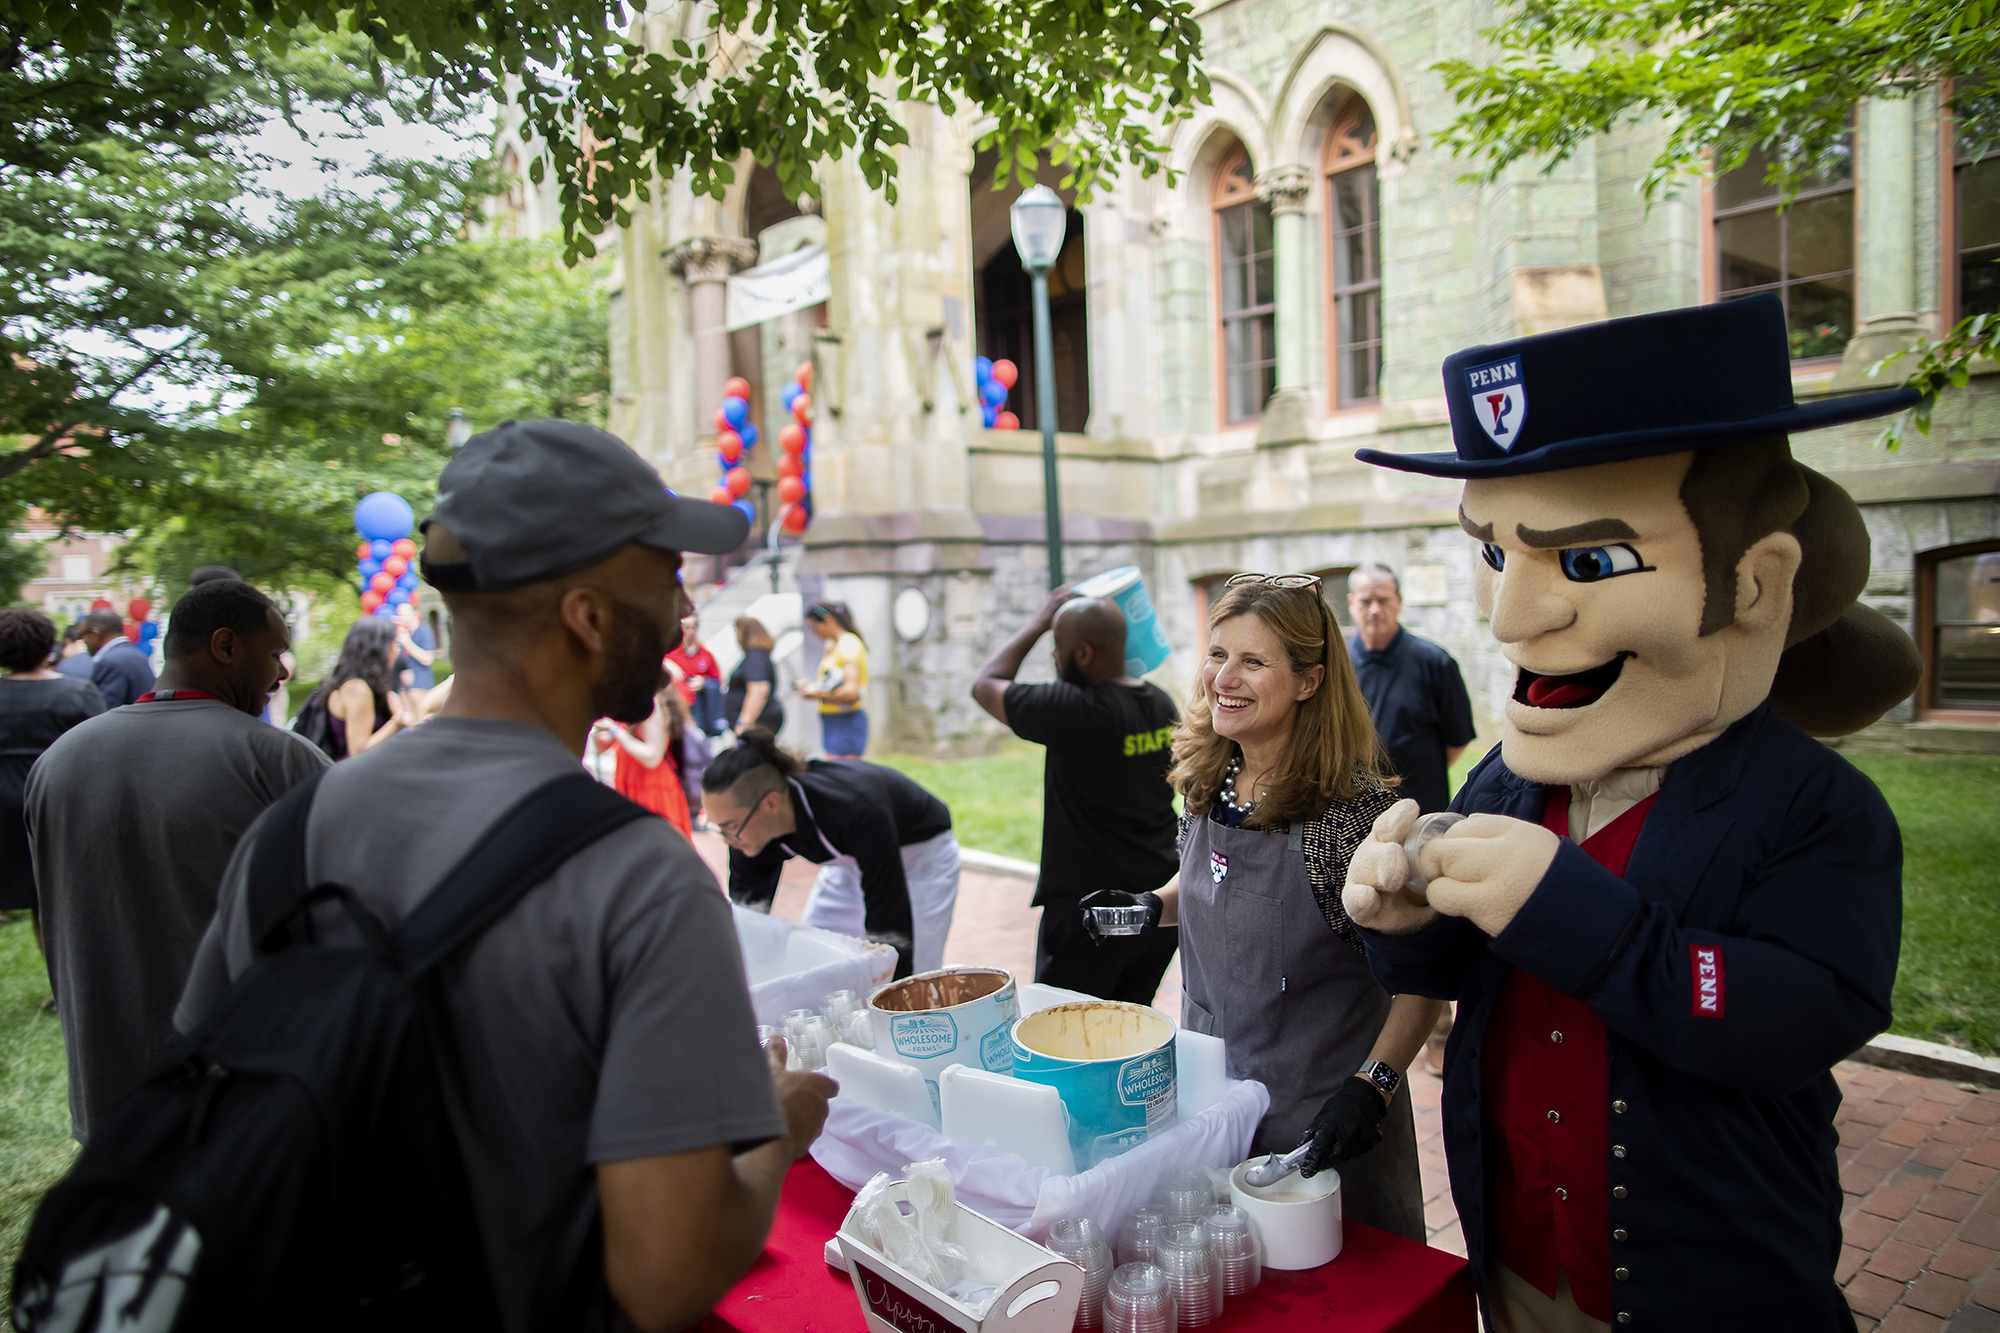 Liz Magill scoops ice cream and smiles with the Quaker mascot